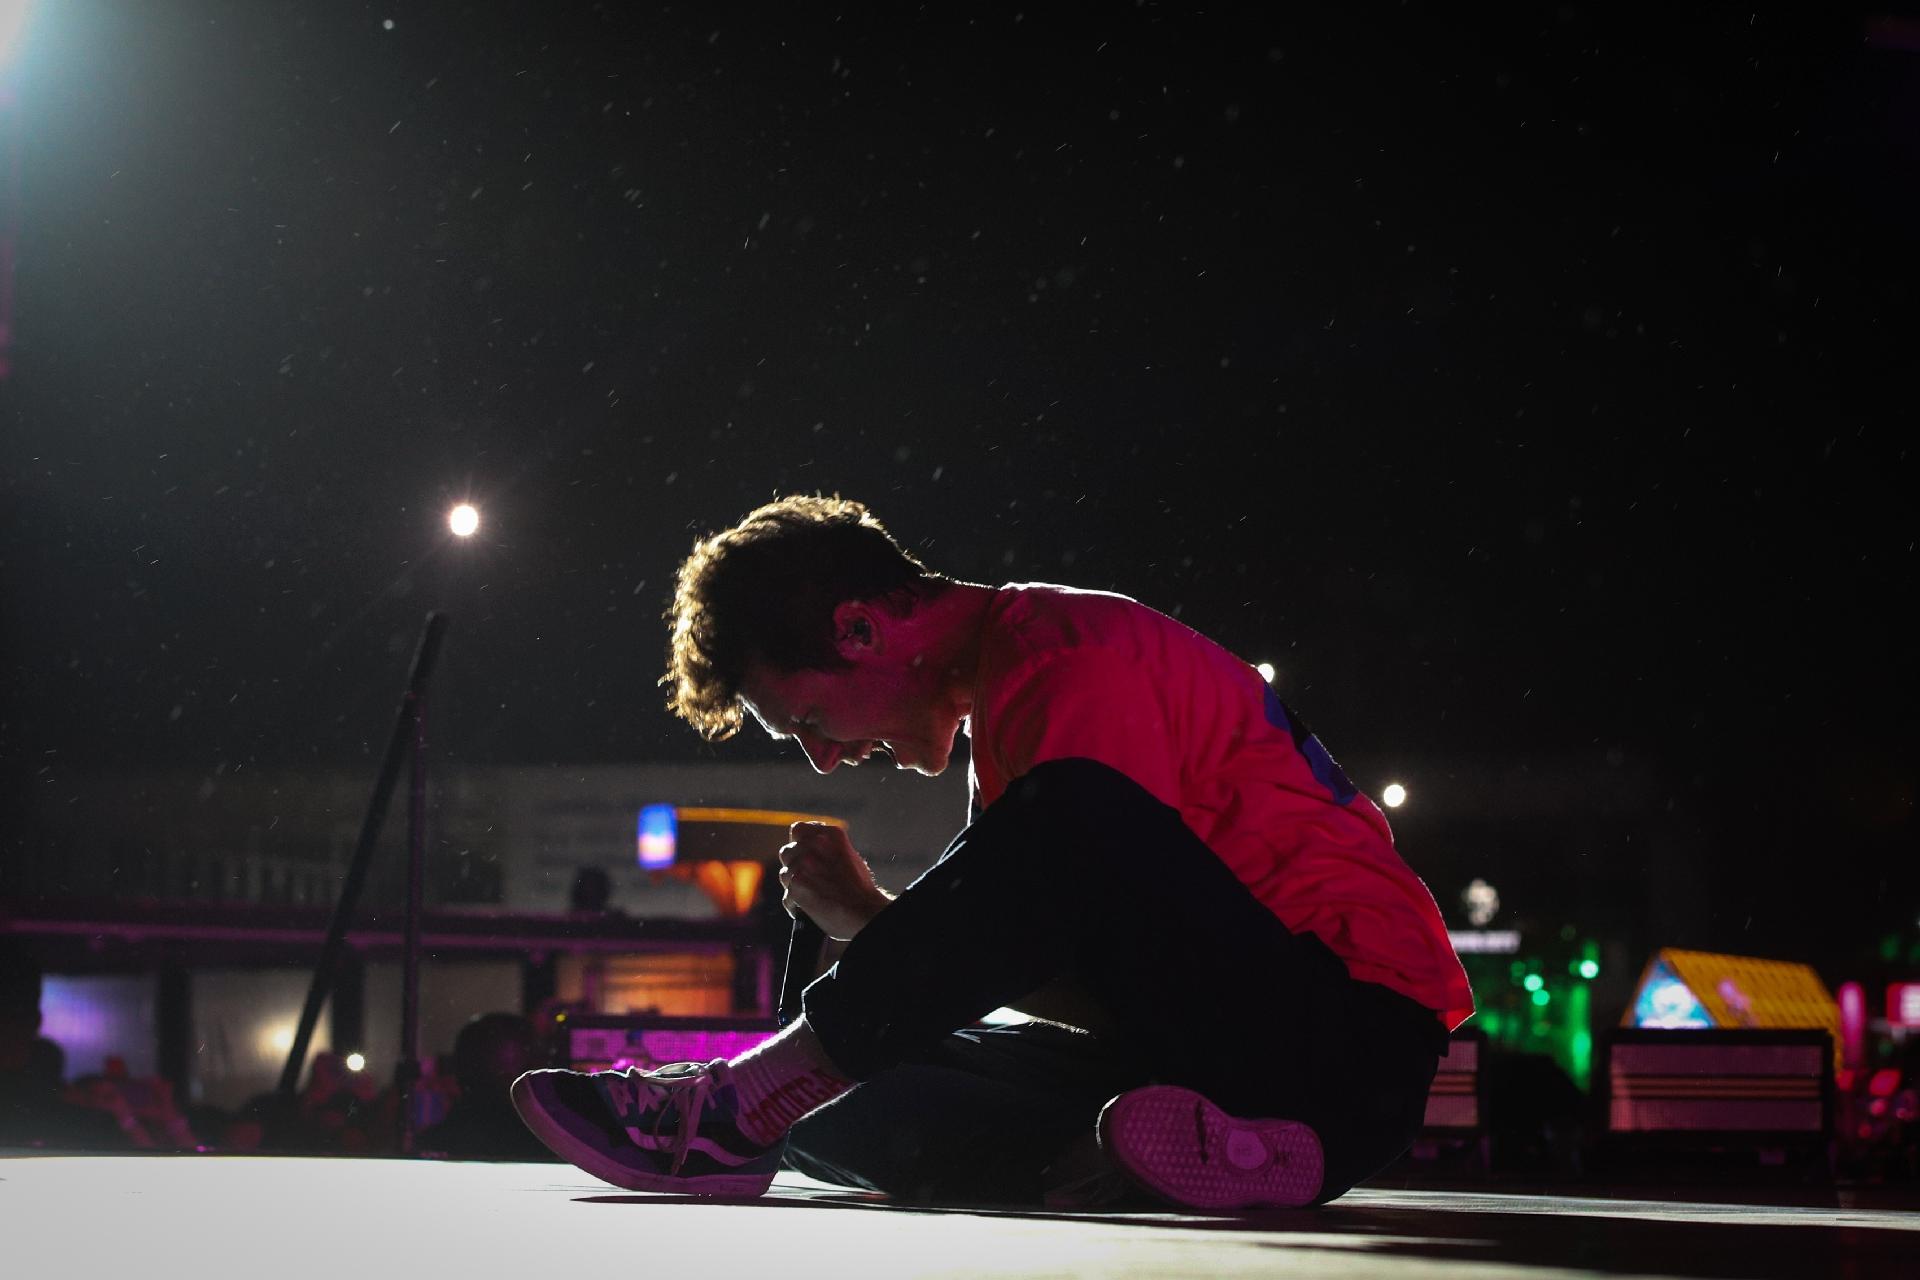 Bastille sits down to sing while performing on stage at Mundo do Rock in Rio - Zô Guimarães/UOL